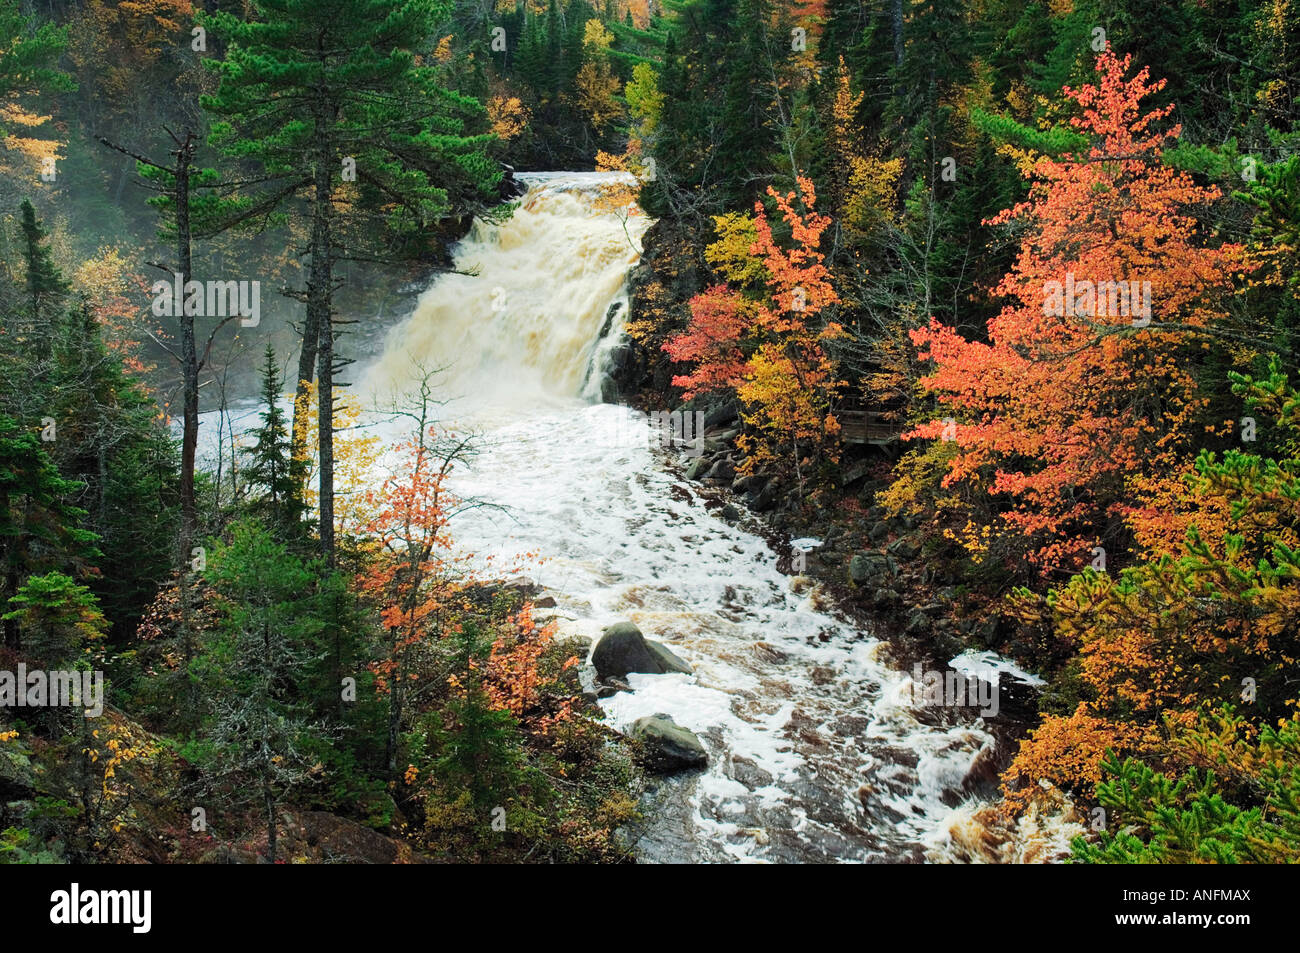 Mary Ann Falls And Autumn Foliage In Cape Breton Highlands National